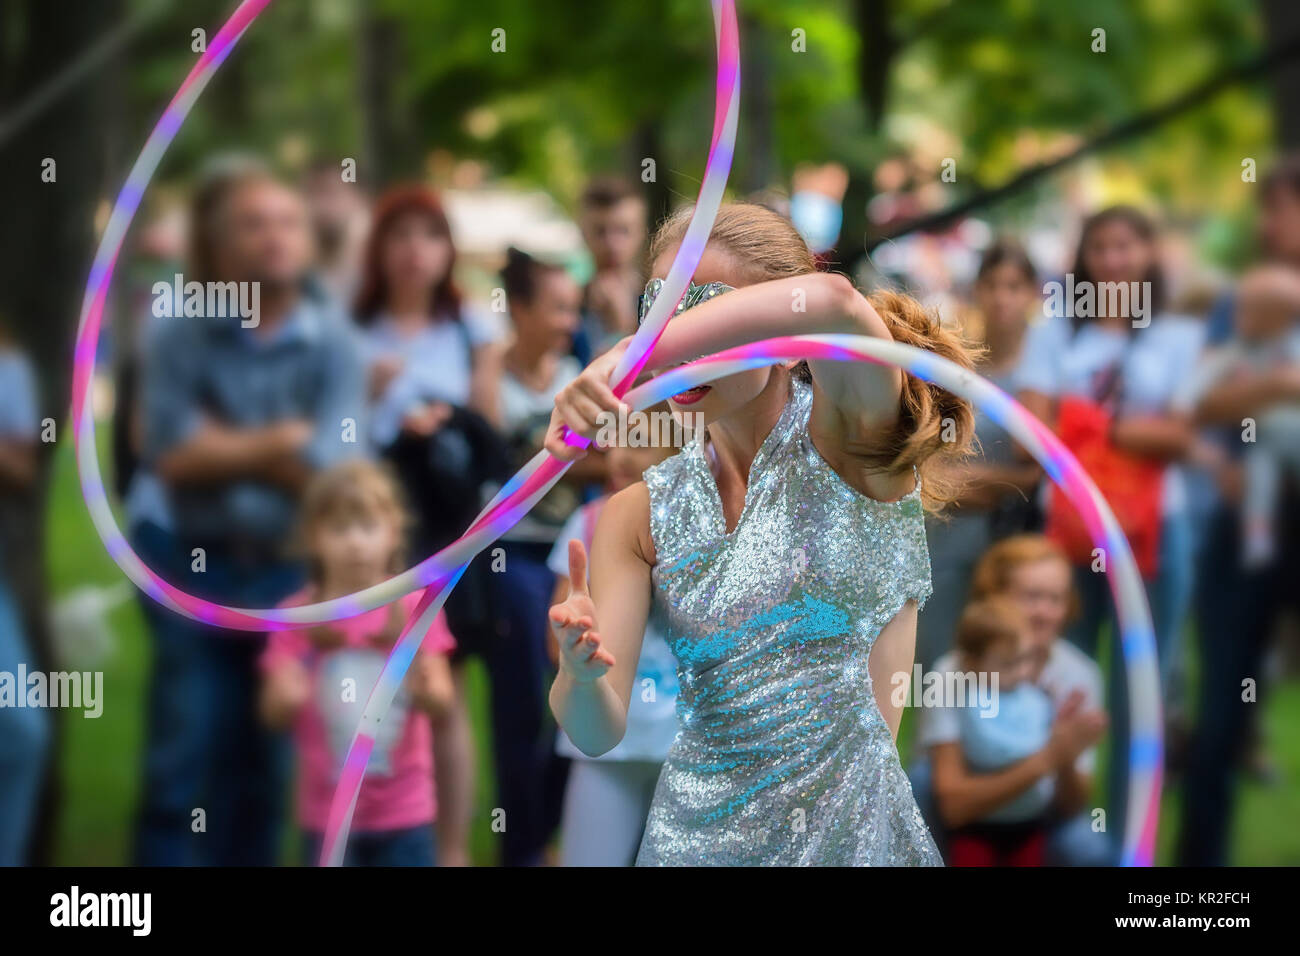 Girl in beautiful dress performs with hula hoops Stock Photo